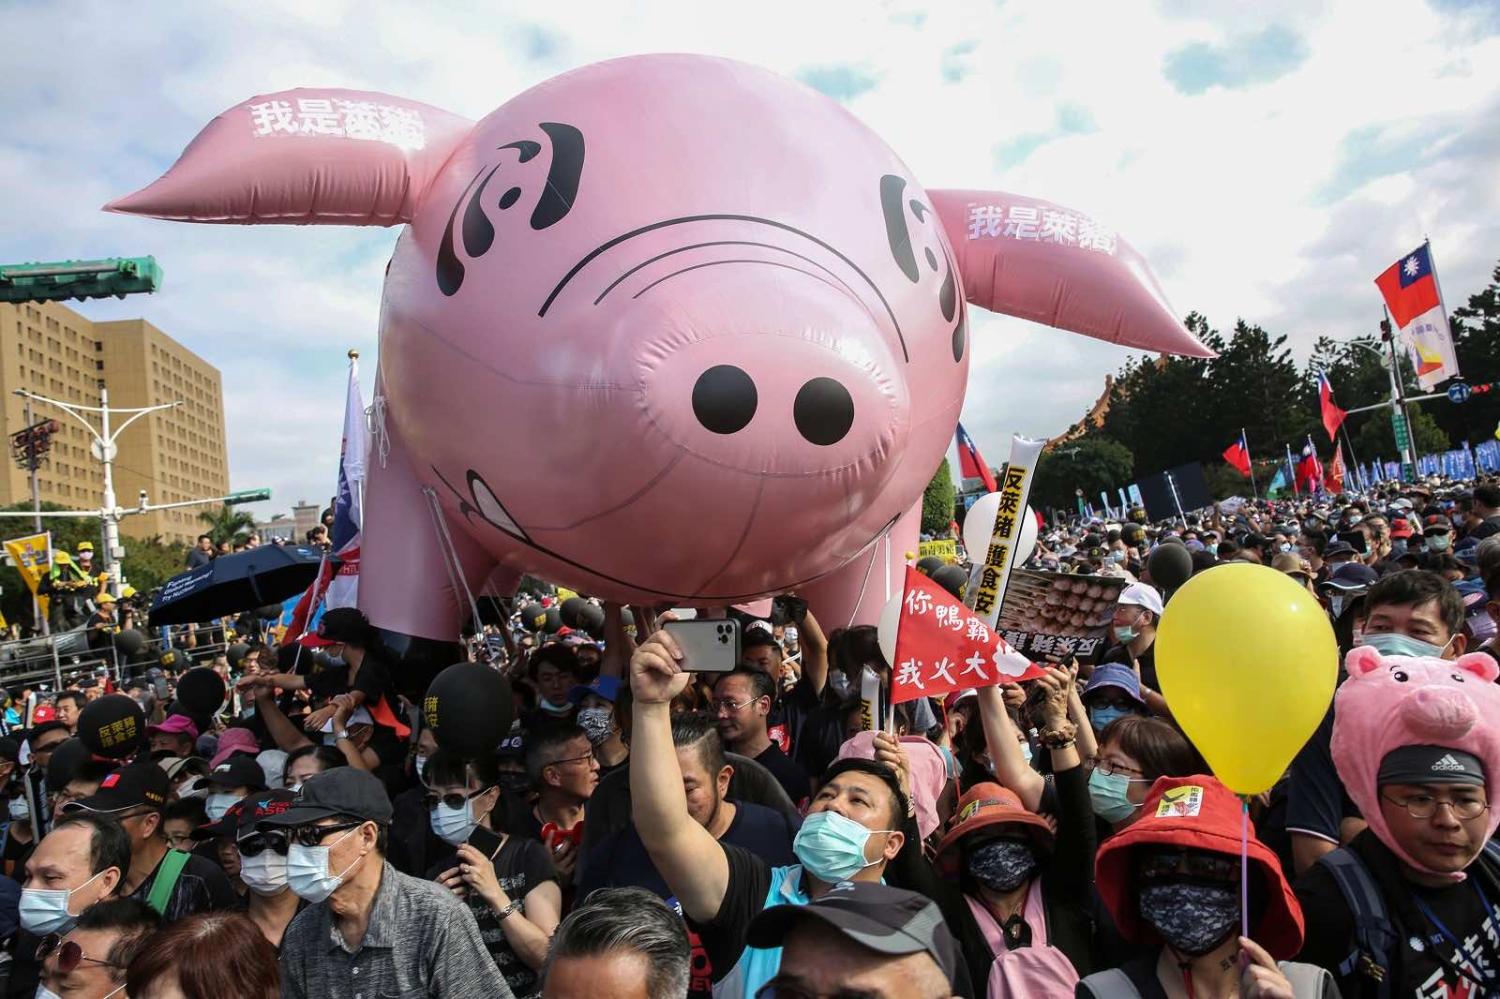 Marchers at the annual pro-labour “Autumn Struggle” protest against the lifting of restrictions on US pork containing ractopamine feed additive, Taipei, November 2020 (Hsu Tsun-hsu/AFP via Getty)